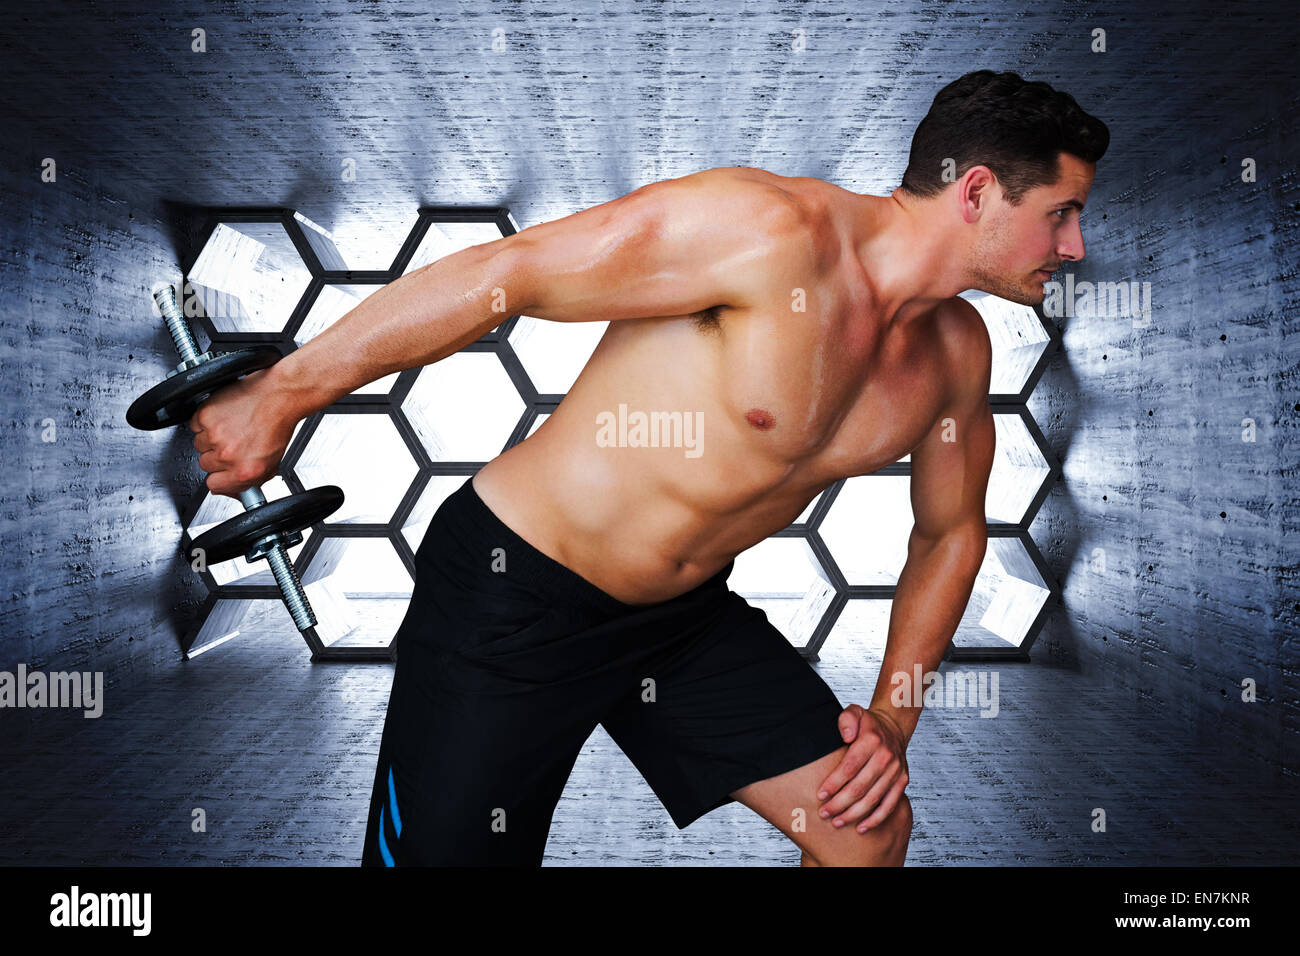 Composite image of bodybuilder lifting dumbbell Stock Photo